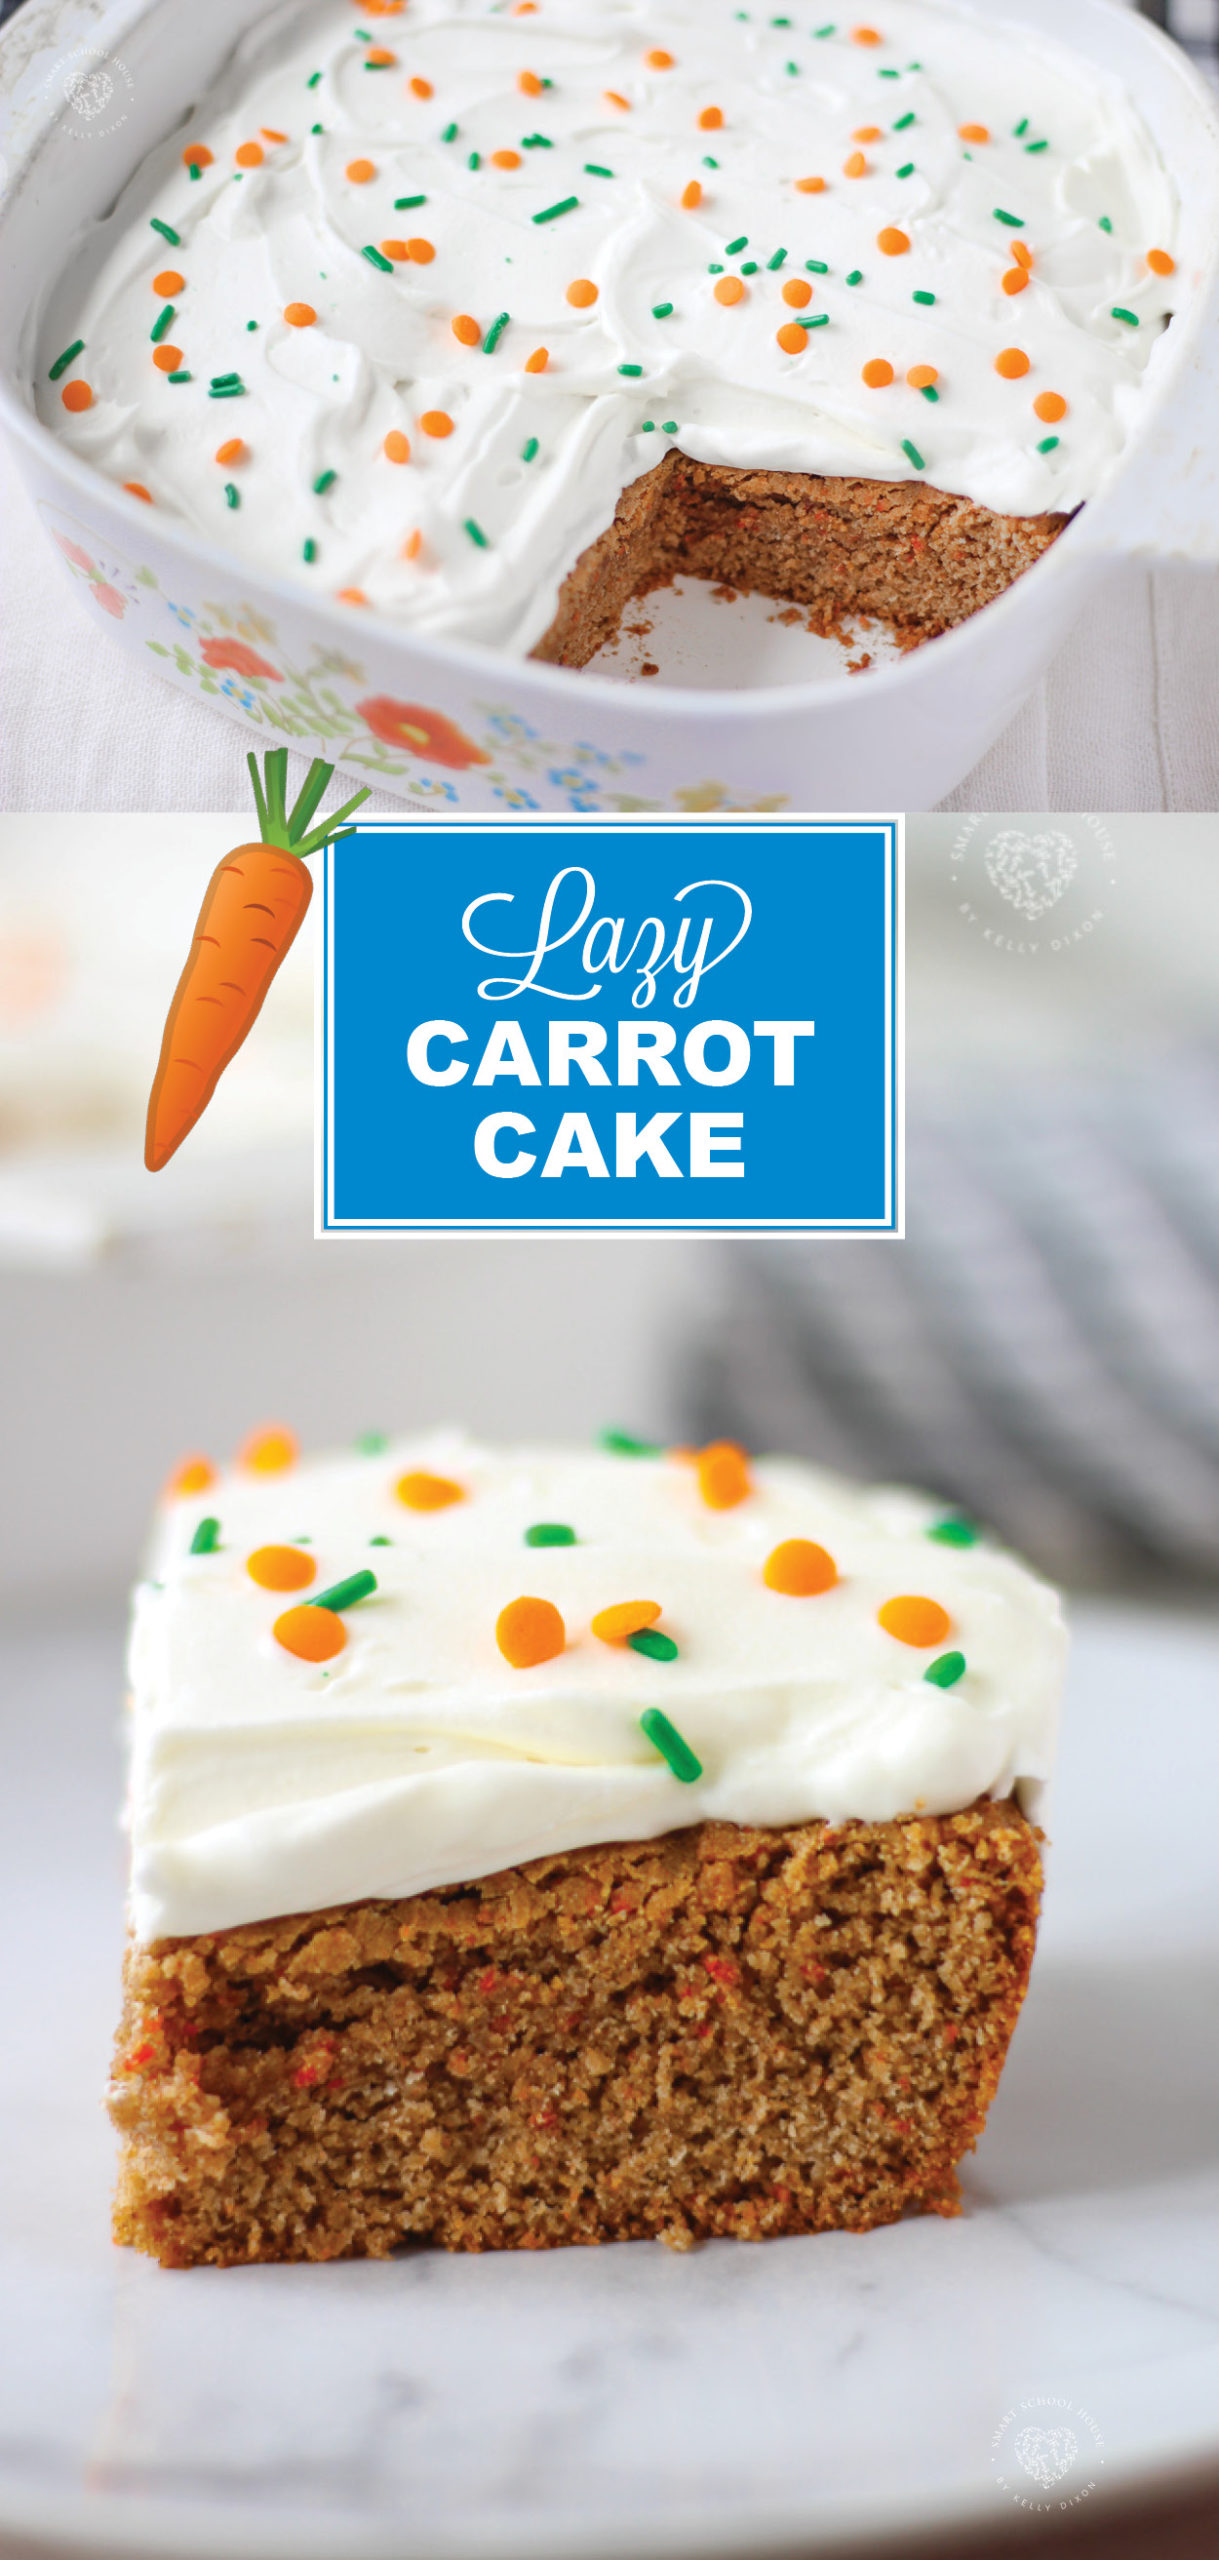 Lazy Carrot Cake - Made with butter, eggs, and topped with a whipped cream frosting.